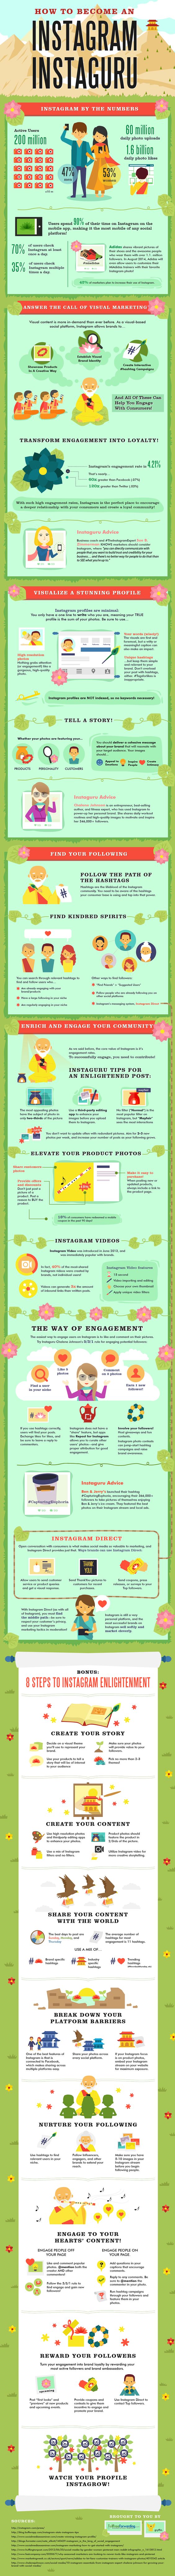 Social Media Marketing On Instagram: Become An Instaguru — #infographic